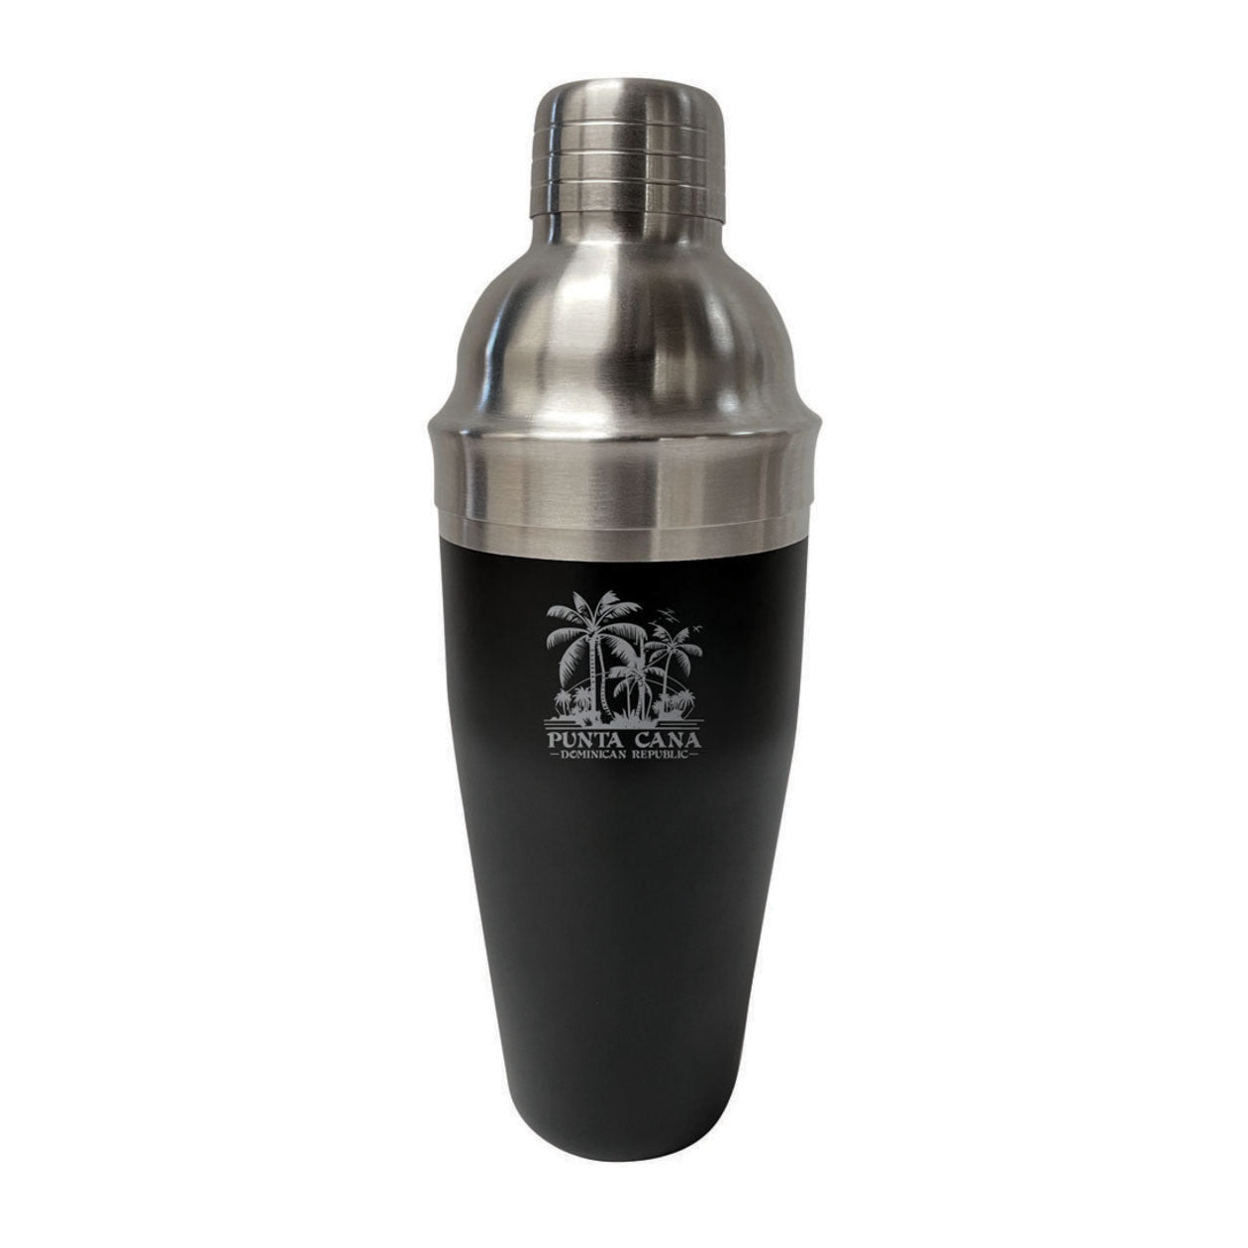 Punta Cana Dominican Republic Souvenir 24 Oz Stainless Steel Cocktail Shaker - Palm